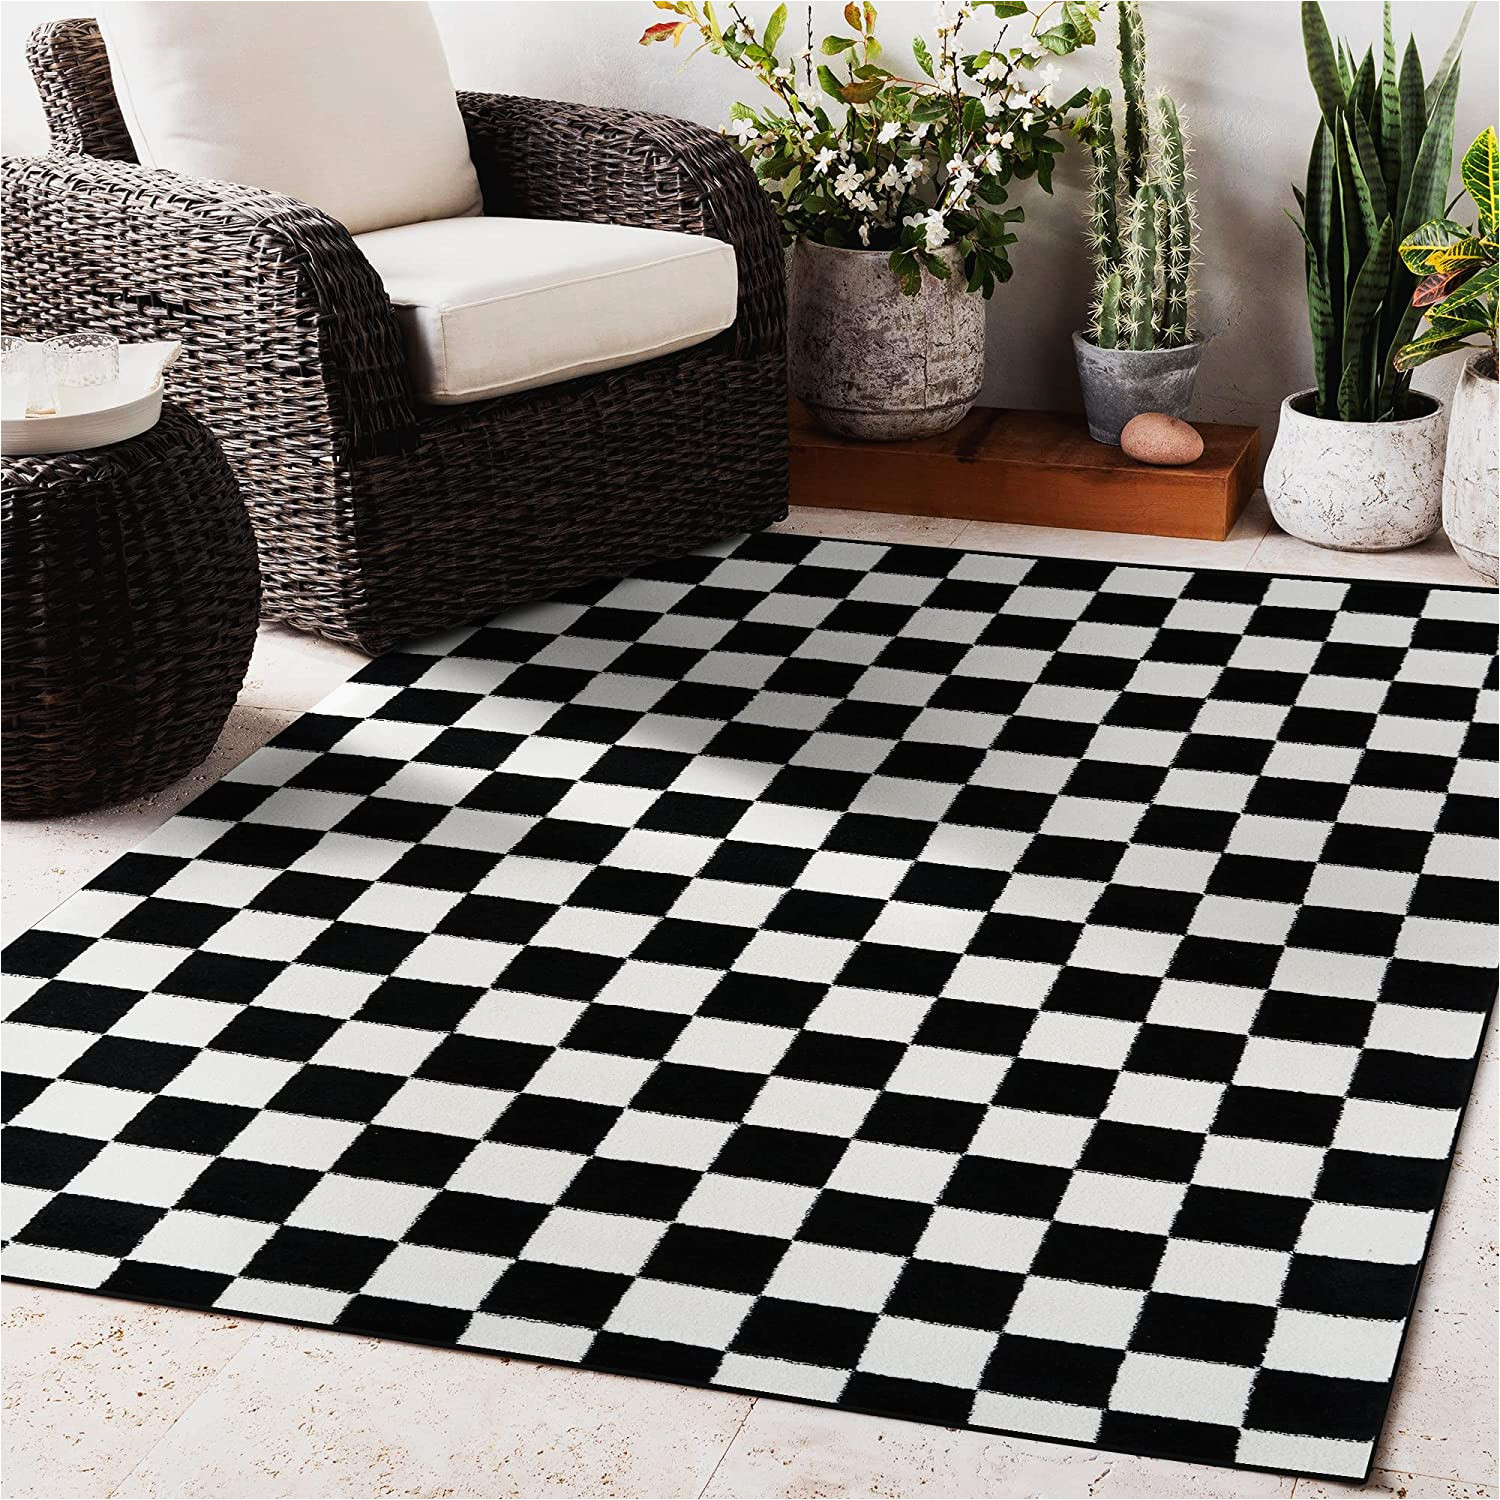 5×7 Black and White area Rugs Buy Persian area Rugs Black 1909 Checkered White area Rug Carpet …